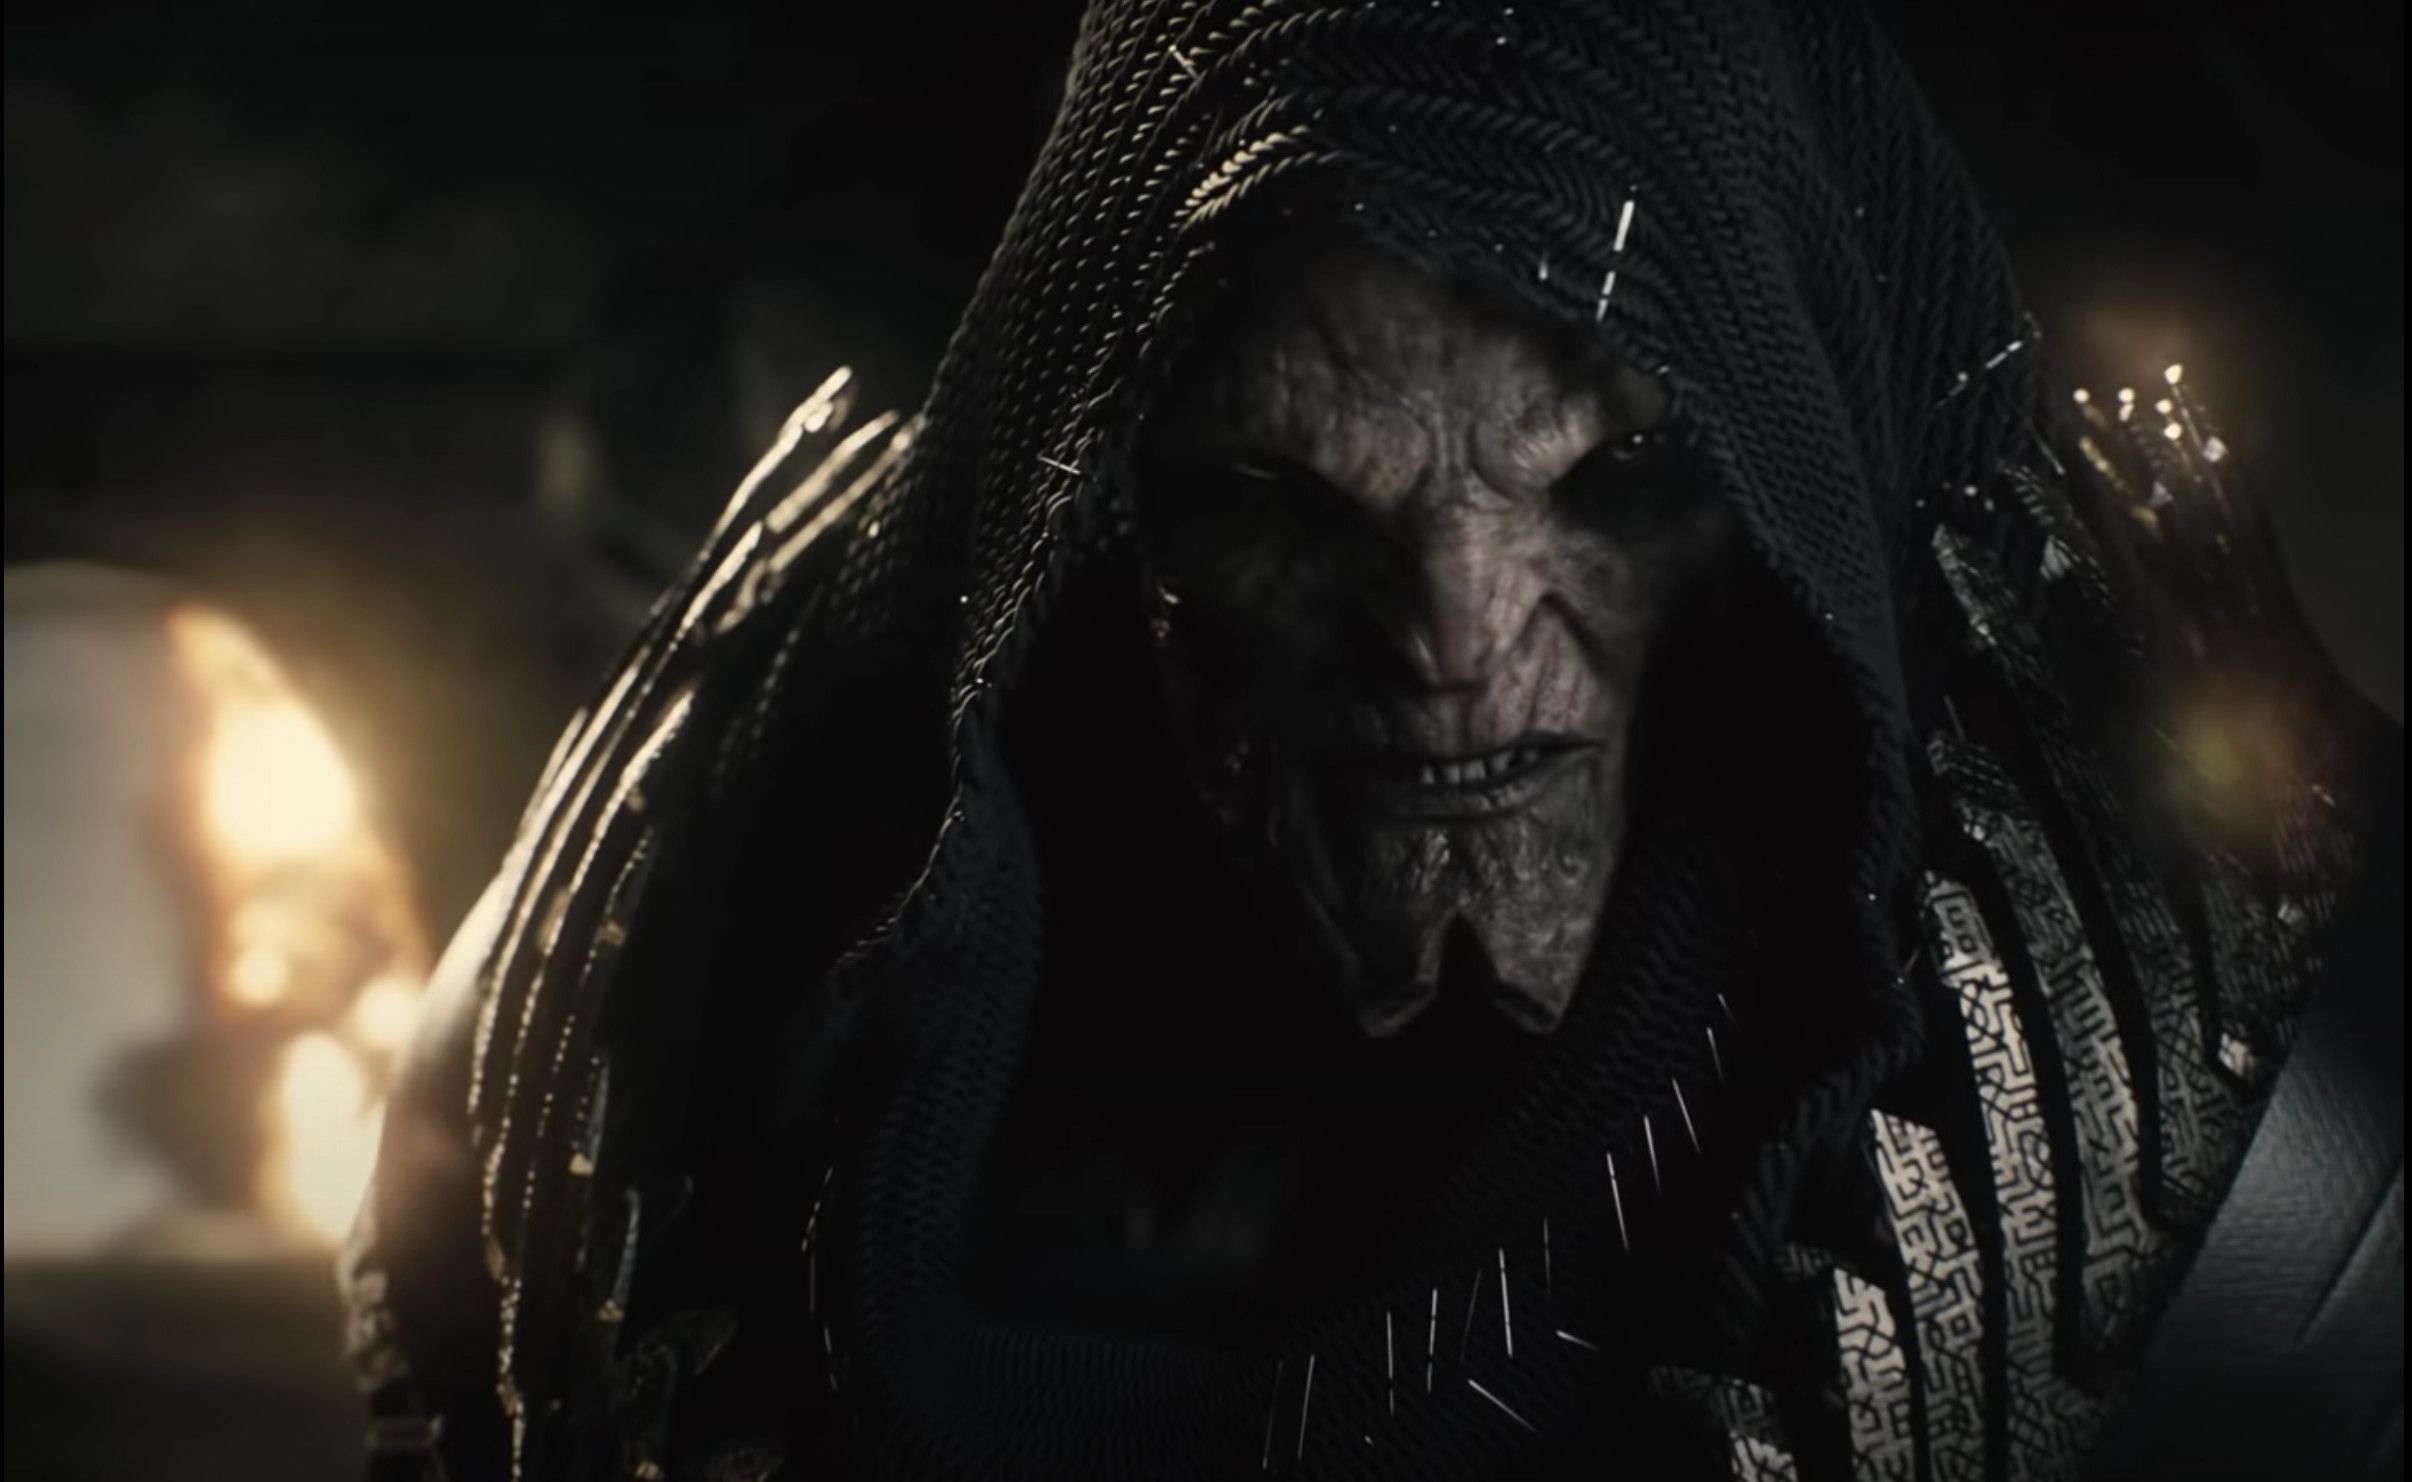 DeSaad in the main Teaser from last year